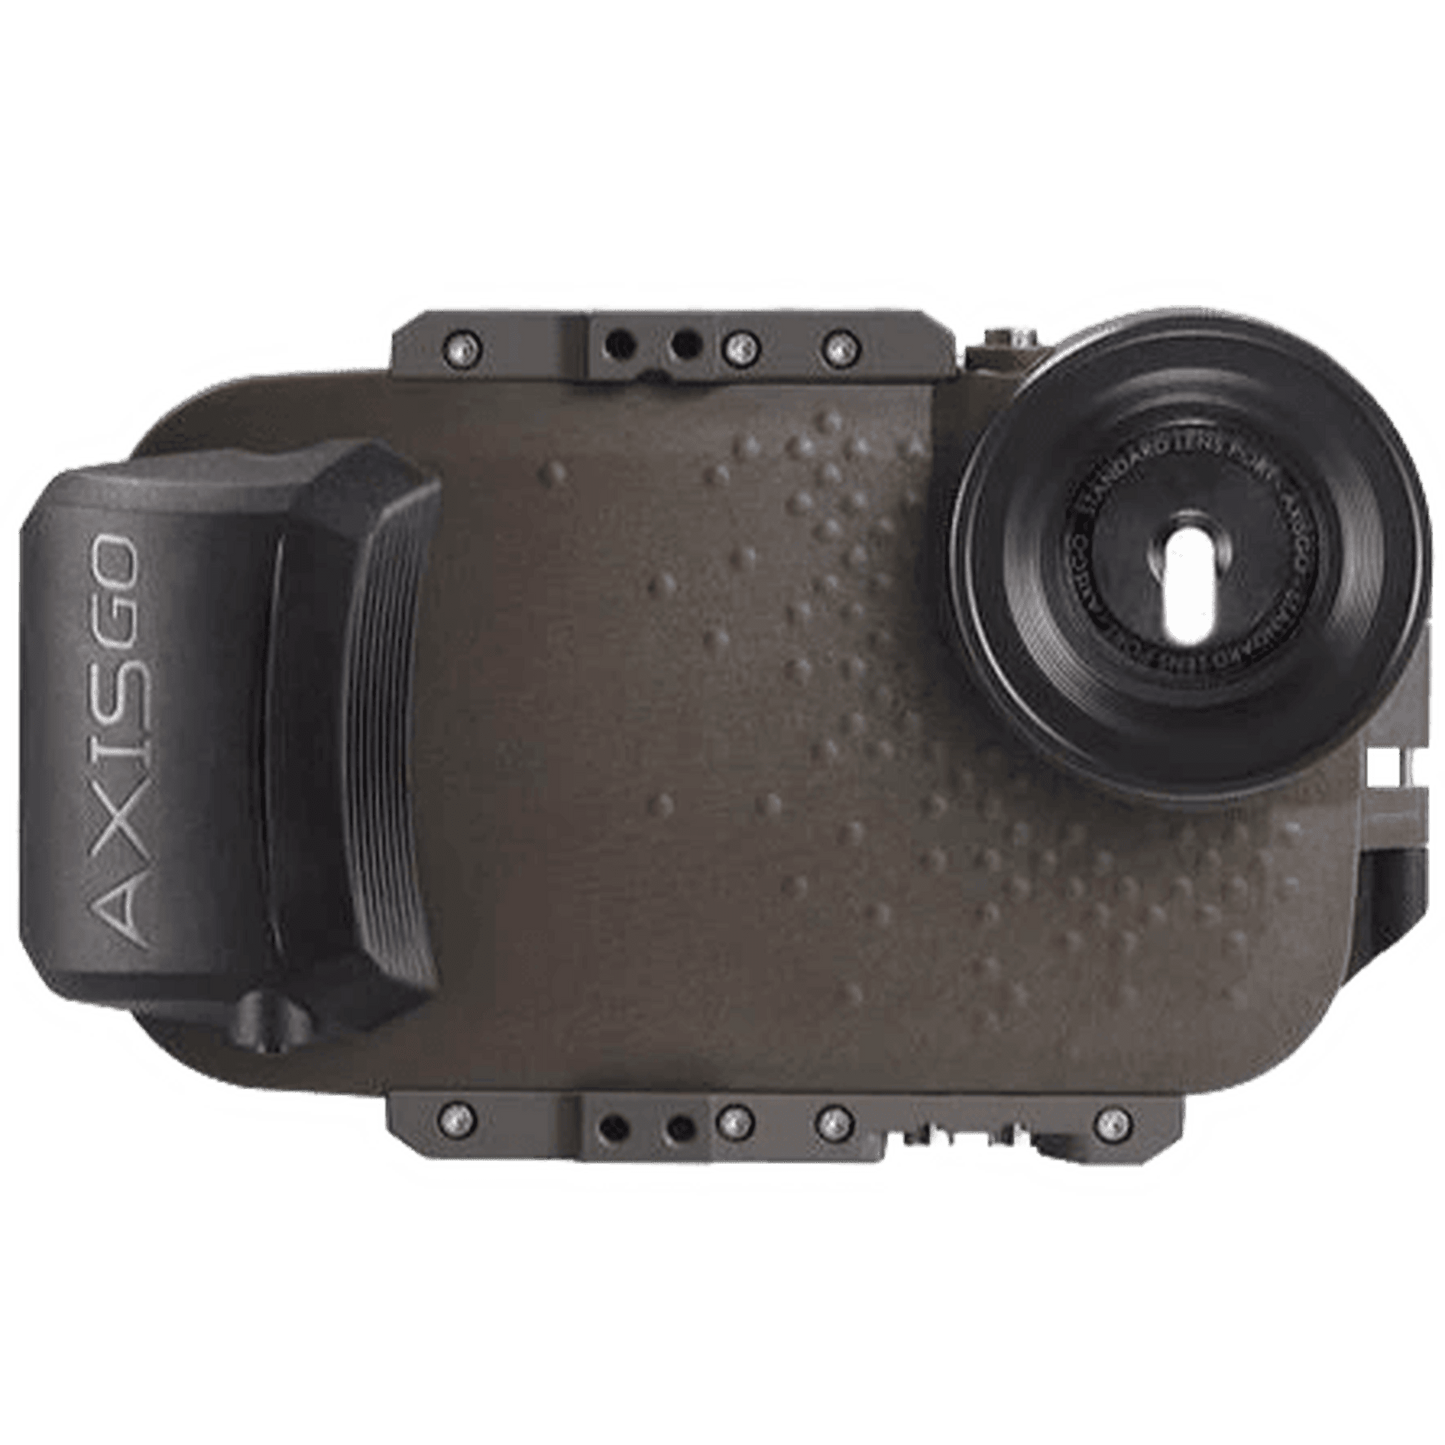 
                  
                    AxisGO 7+ Water Housing for iPhone 7 Plus / iPhone 8 Plus Tactical Green
                  
                